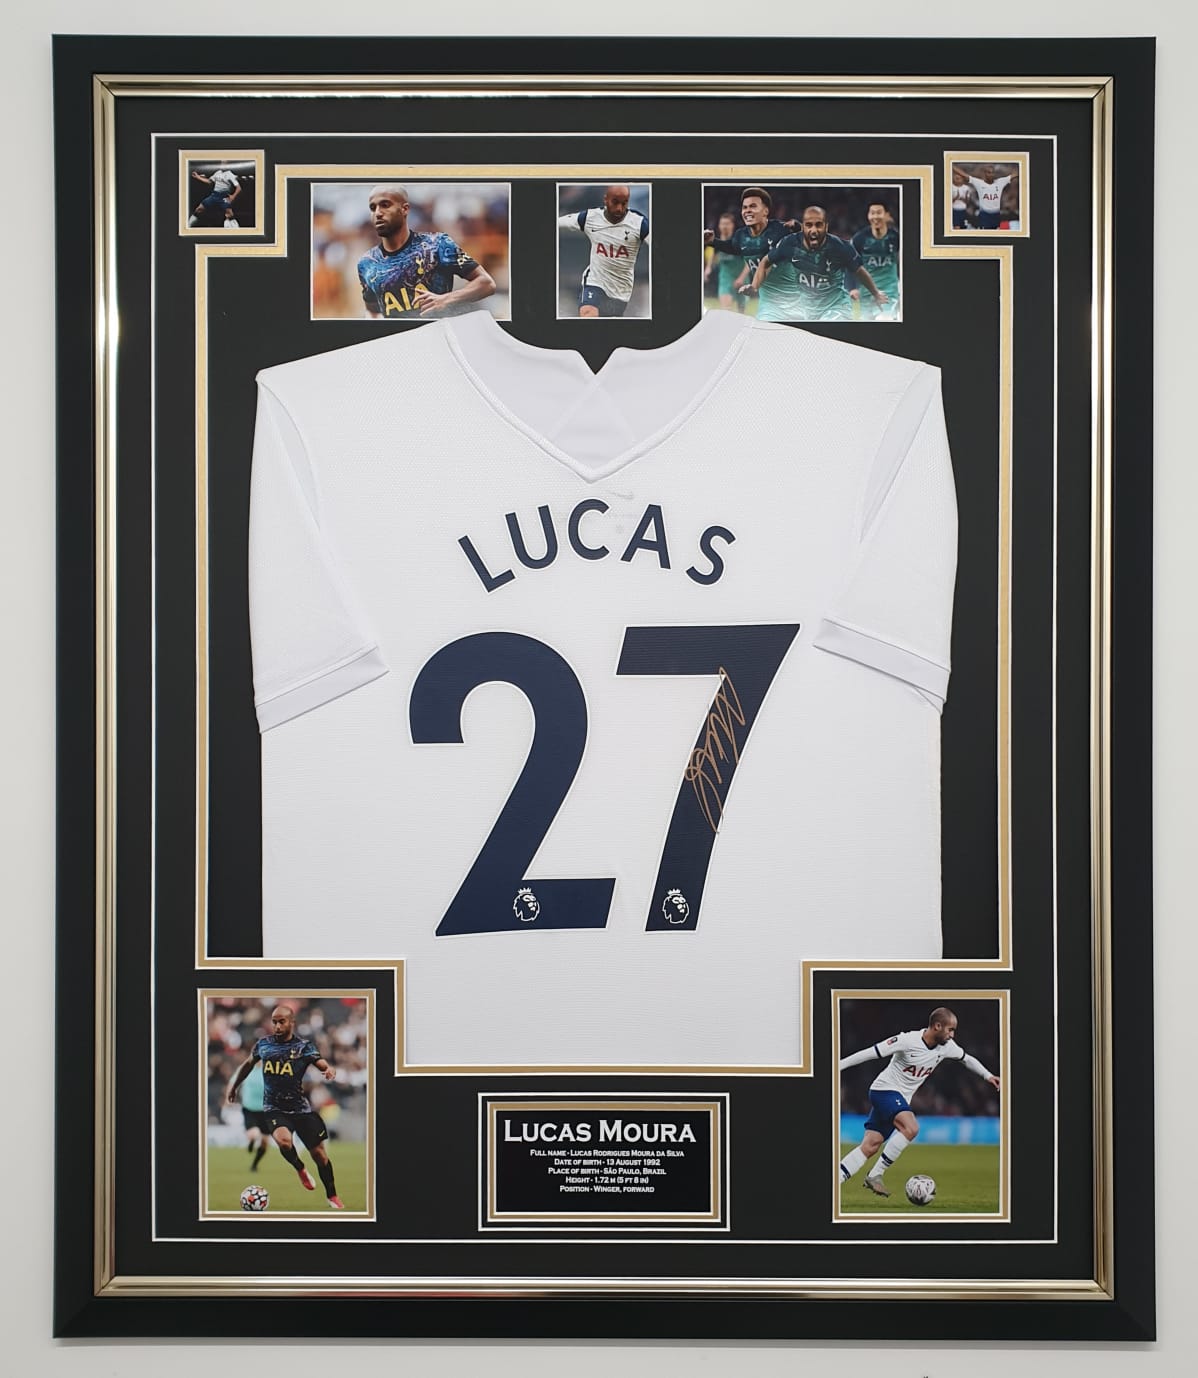 LUCAS MOURA OF SPURS SIGNED JERSEY